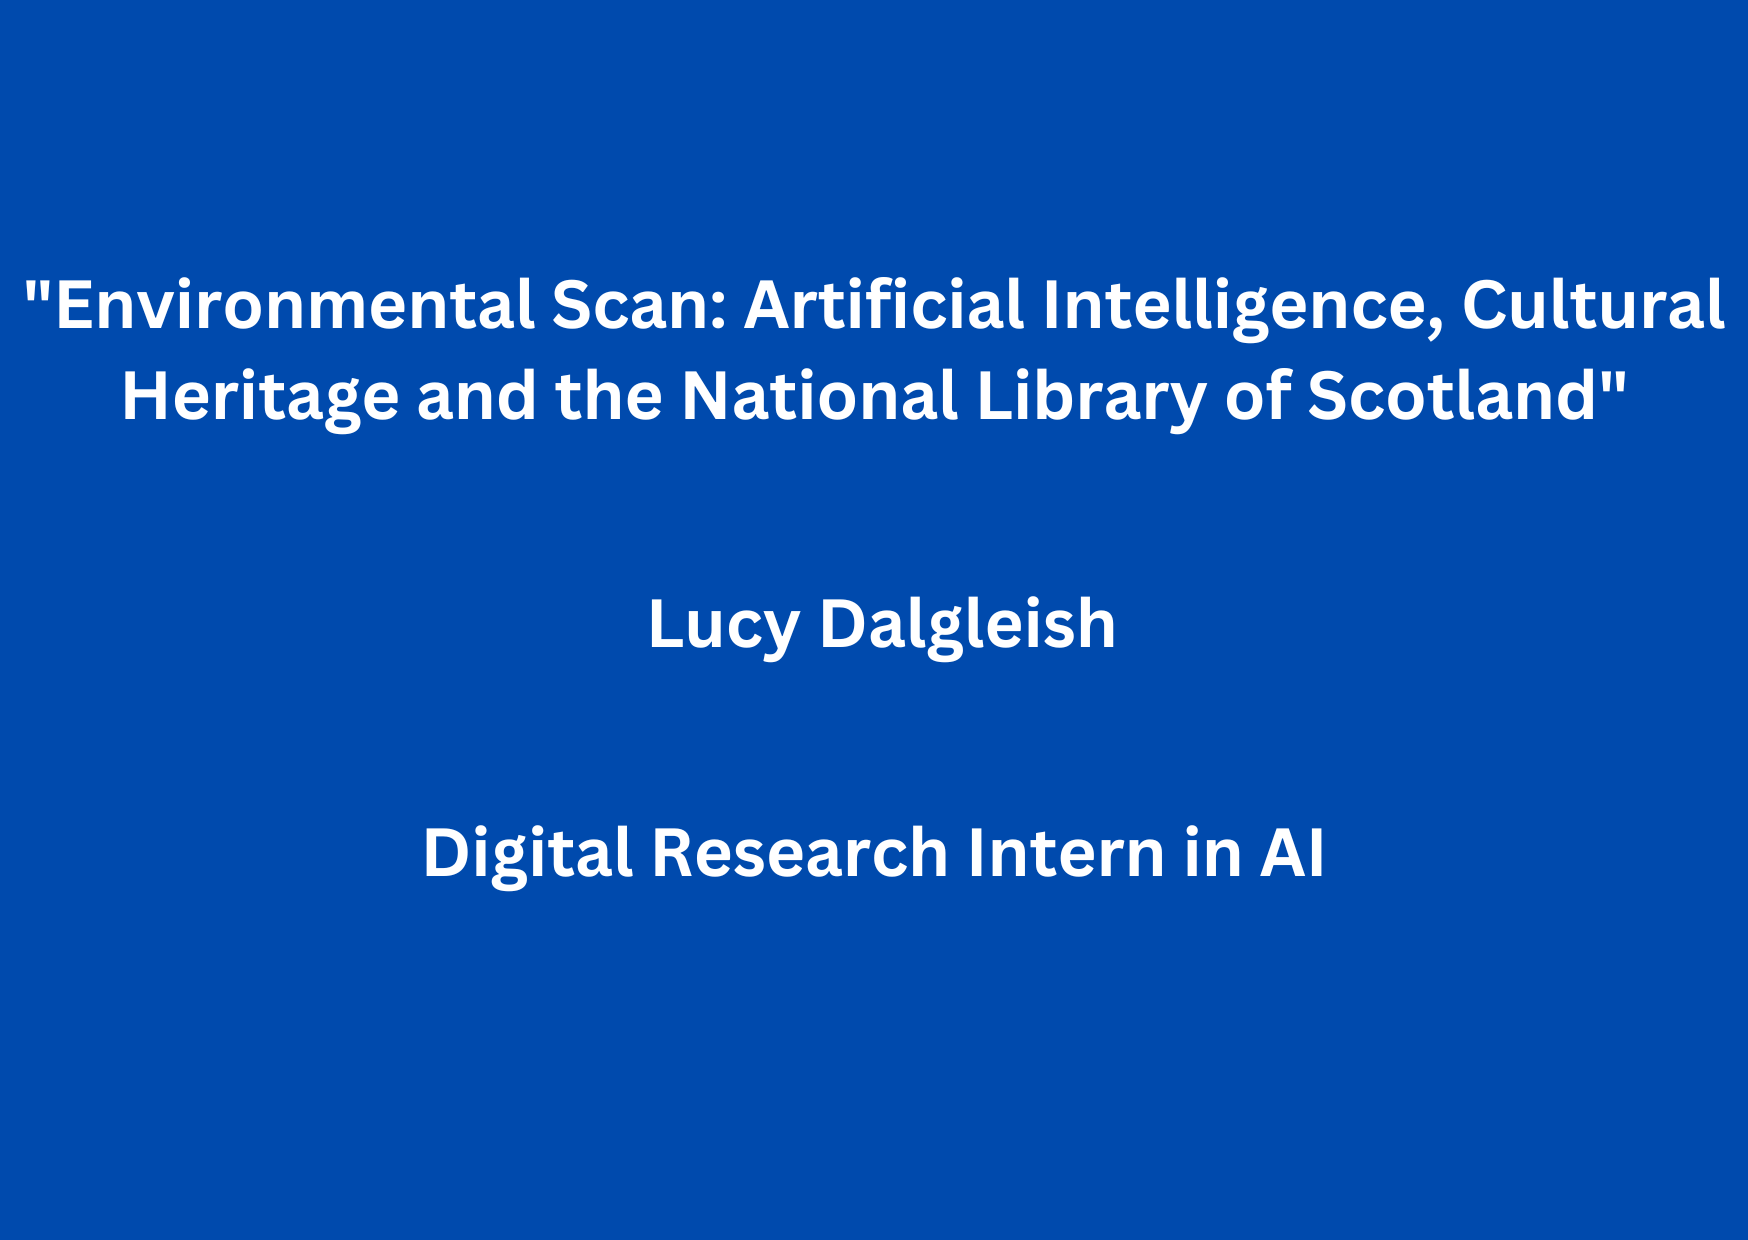 AEOLIAN Workshop 6: “Environmental Scan: Artificial Intelligence, Cultural Heritage and the National Library of Scotland” by Lucy Dalgleish